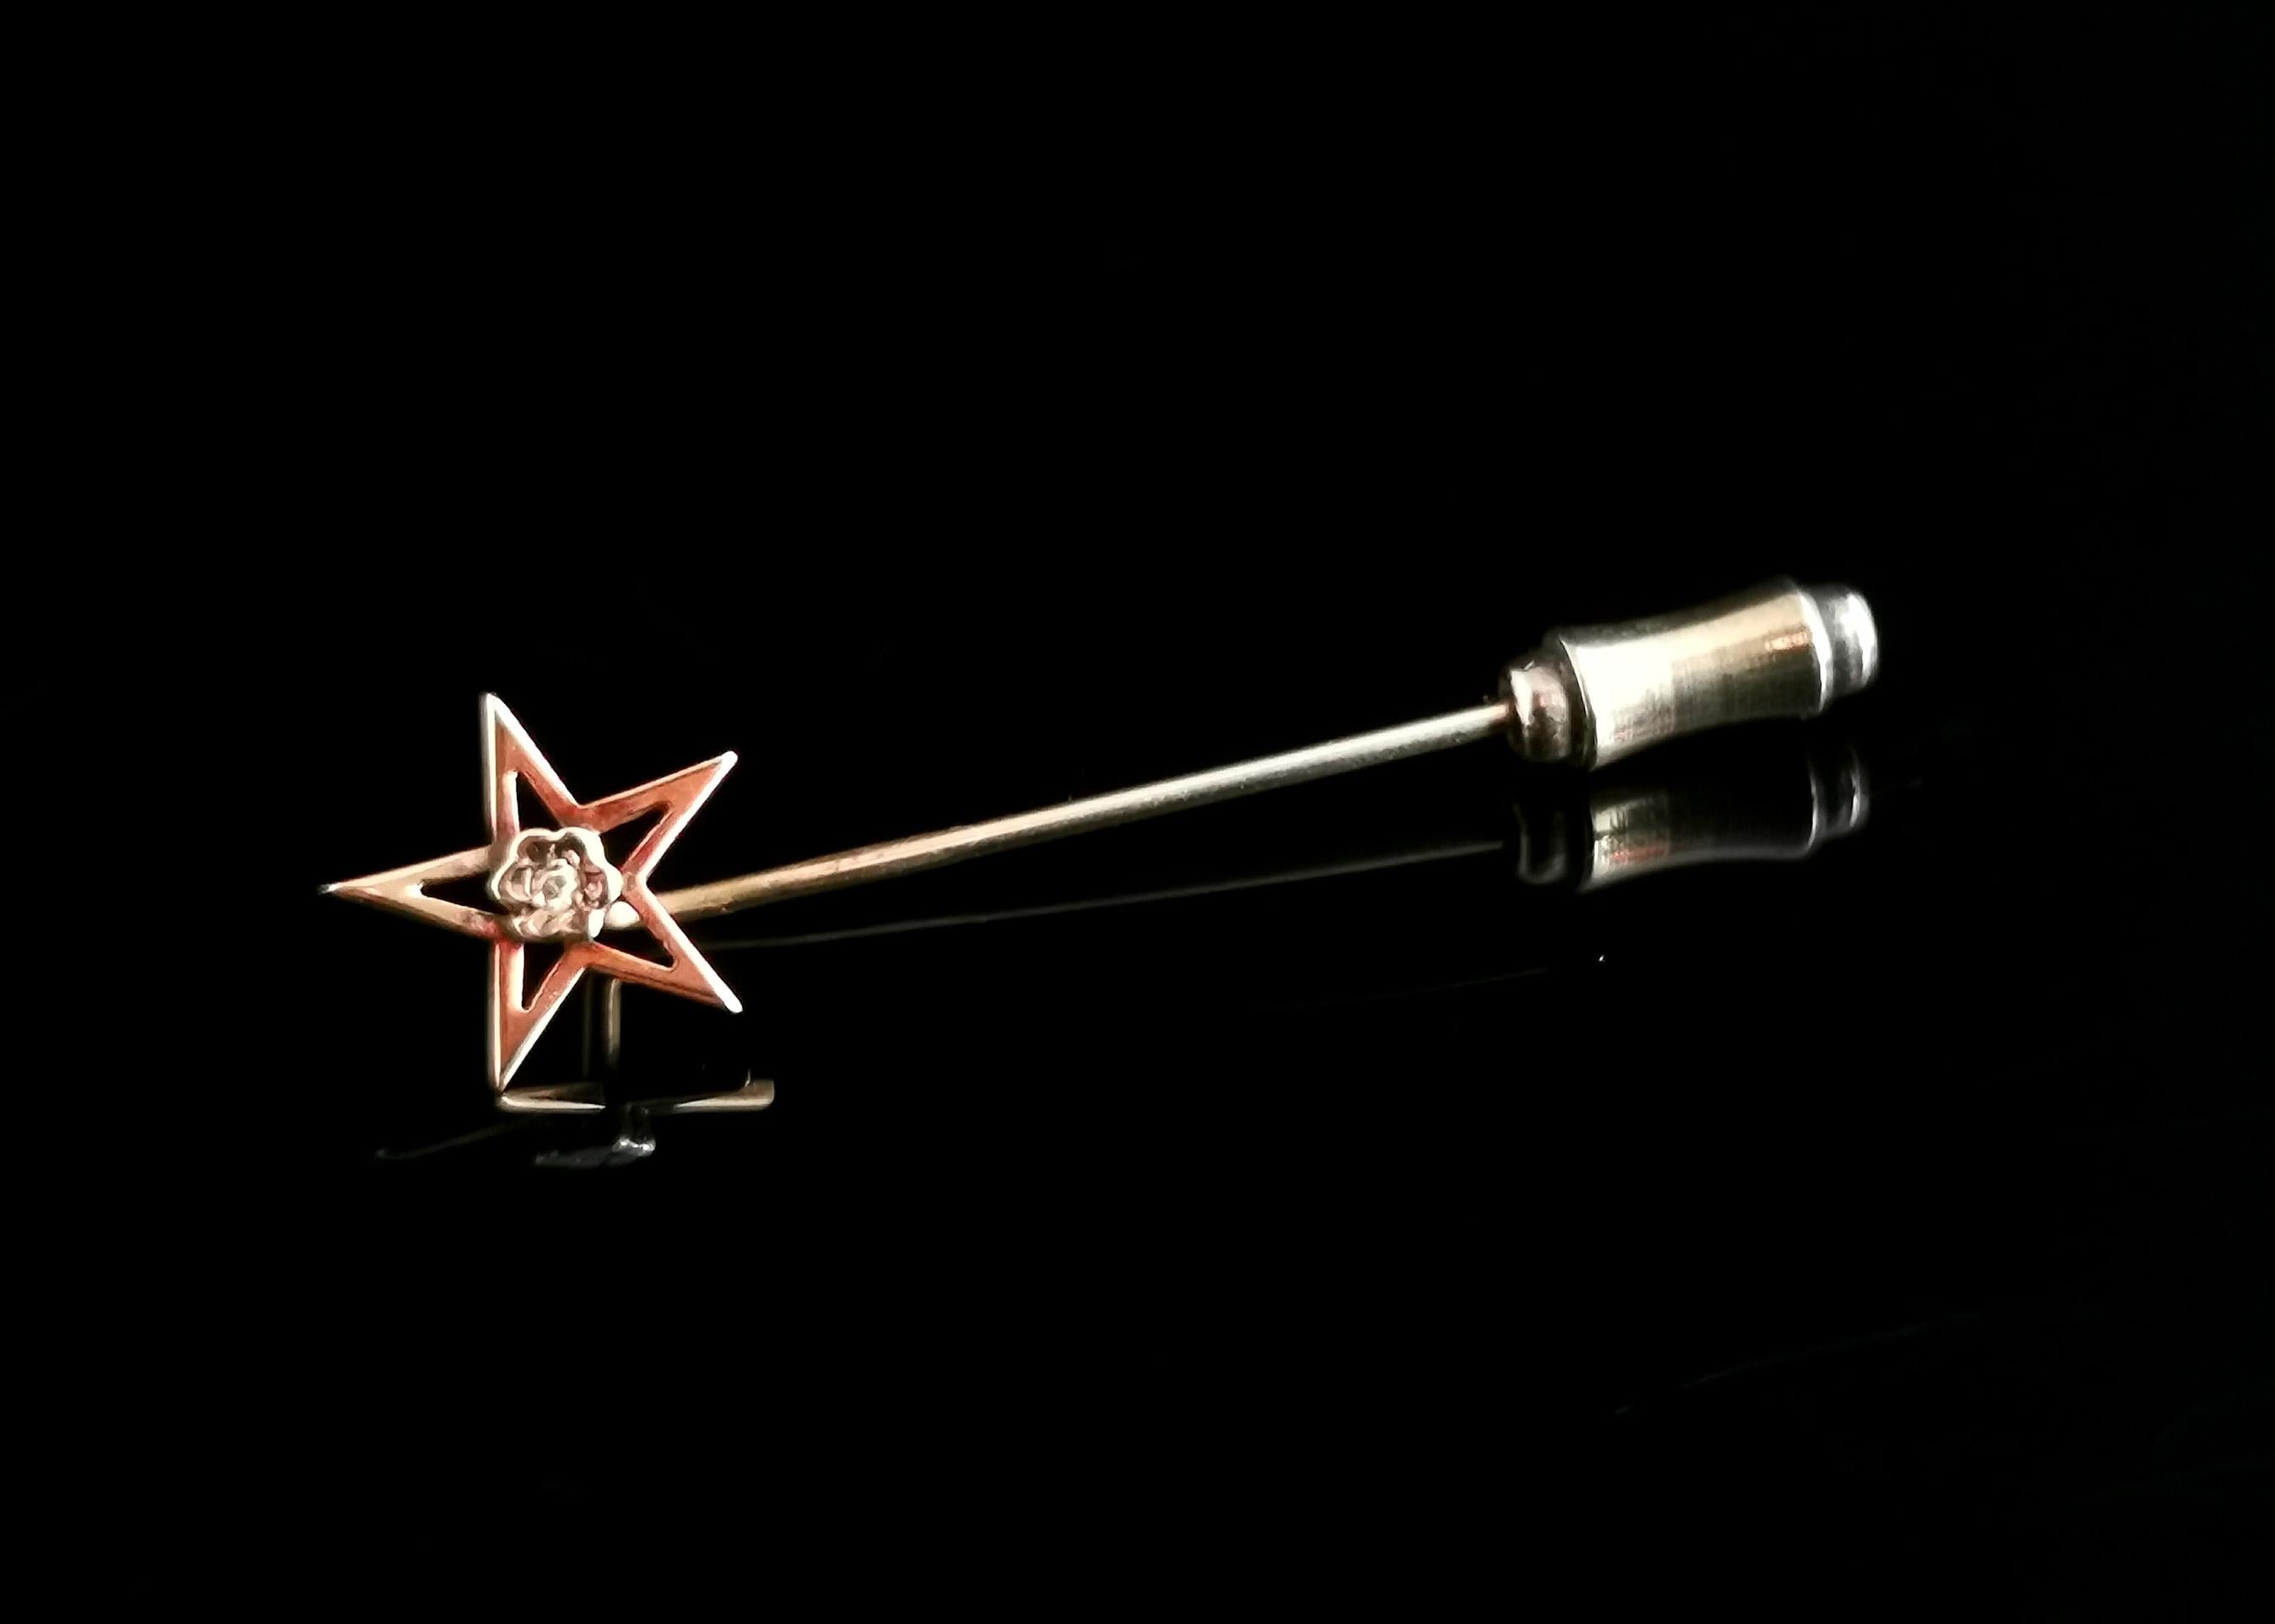 An attractive vintage 9ct gold and diamond stick pin.

A 9ct yellow gold stick pin with a star shaped terminal set with a single diamond chip.

The stick pin also known as a tie or cravat pin started out its journey in the early 19th century as a